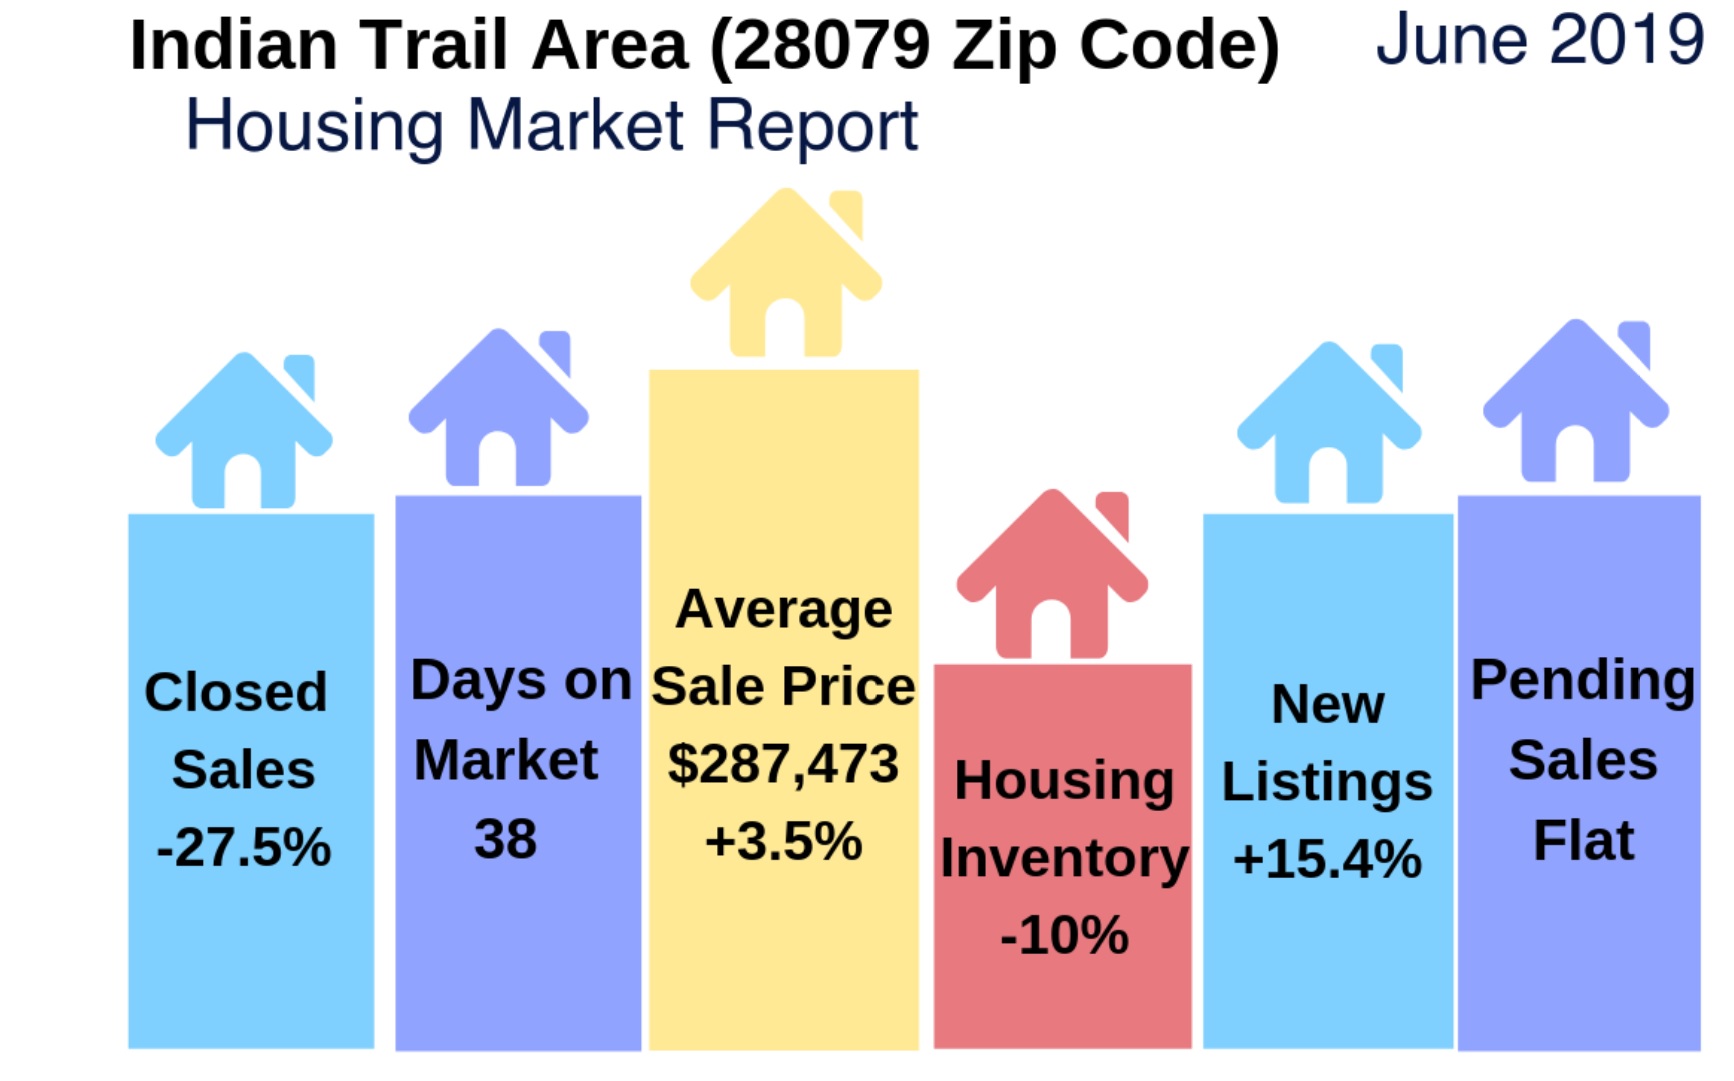 Indian Trail, NC (28079 Zip Code) Housing Market Update & Video: May 2019